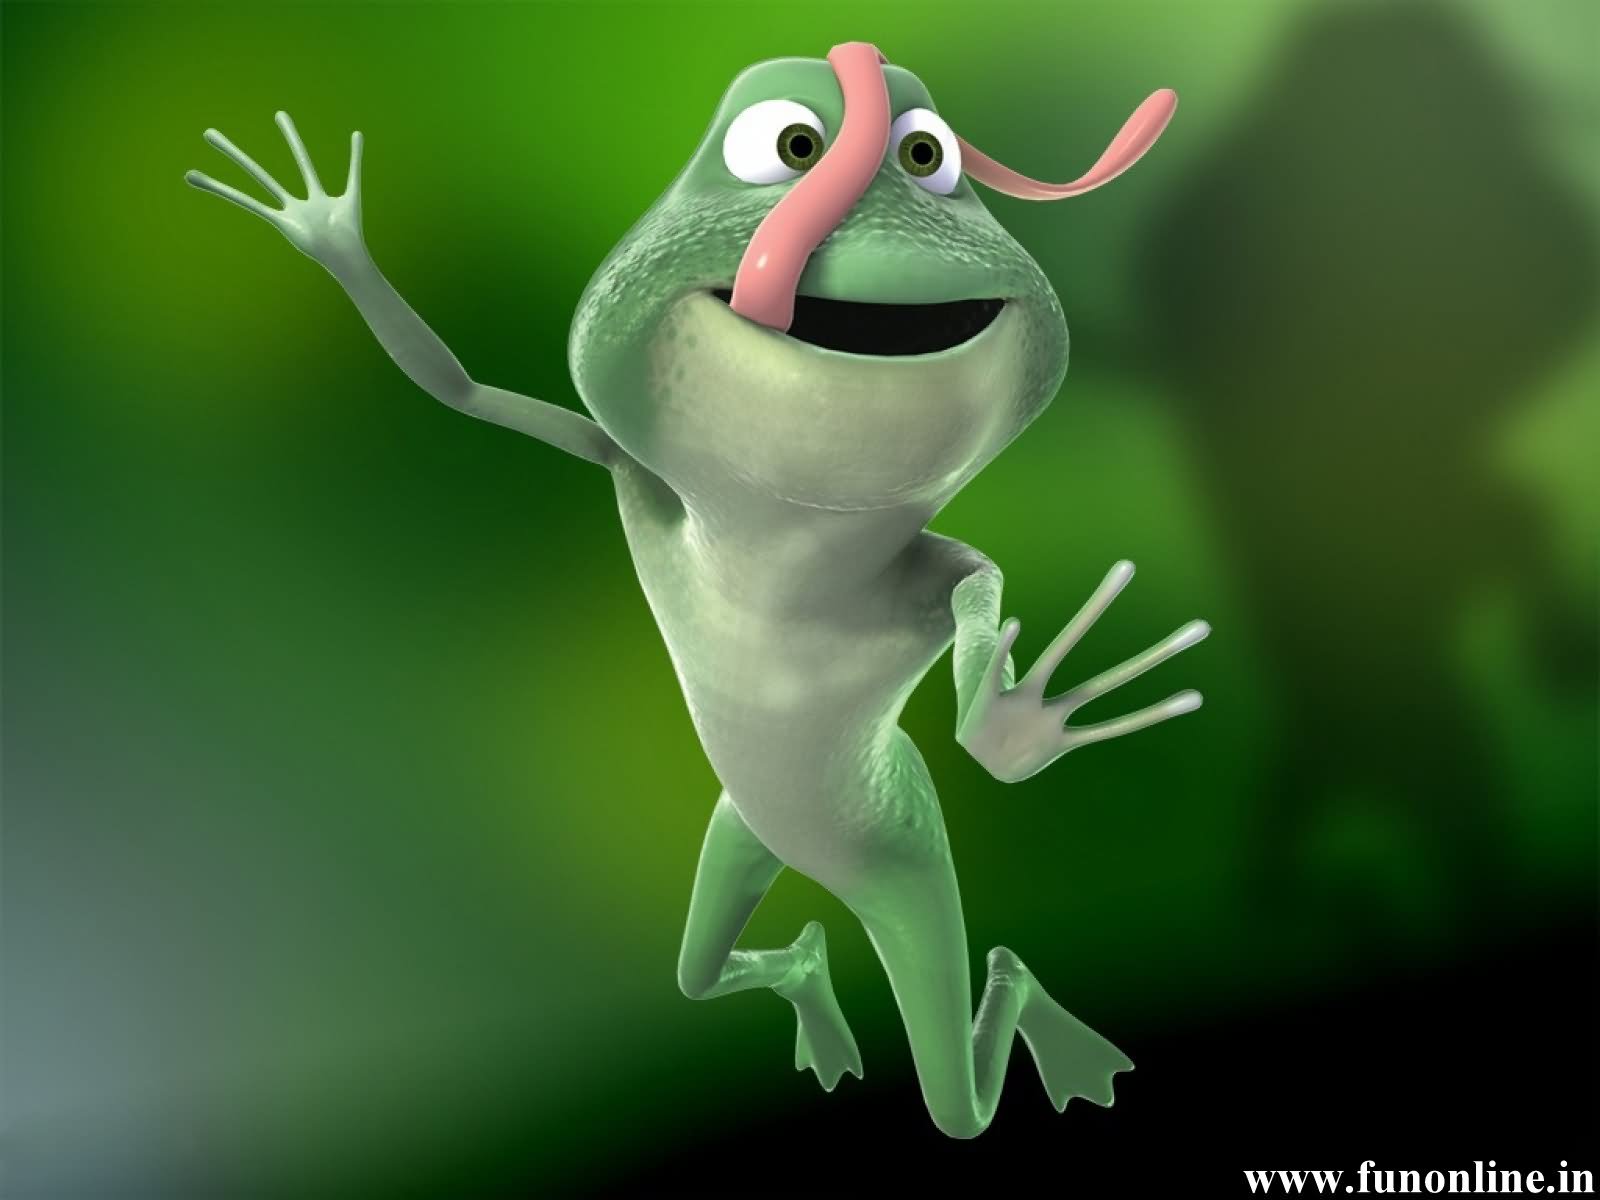 Funny Frog Showing Long Tongue While Jumping